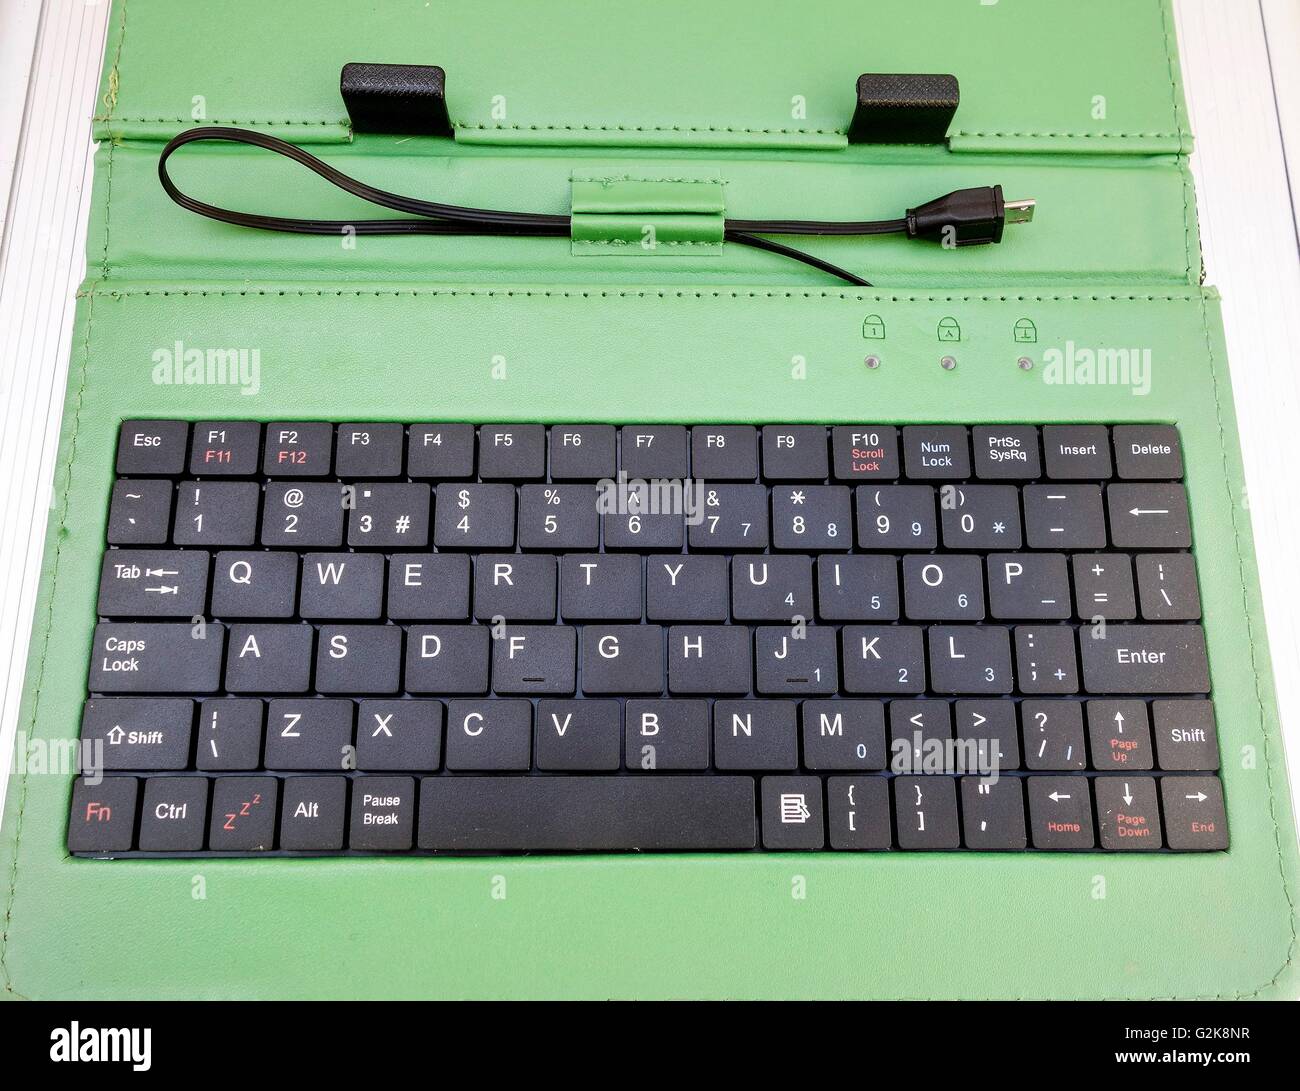 Portable Mini USB Keyboard for a Tablet Stock Photo - Alamy